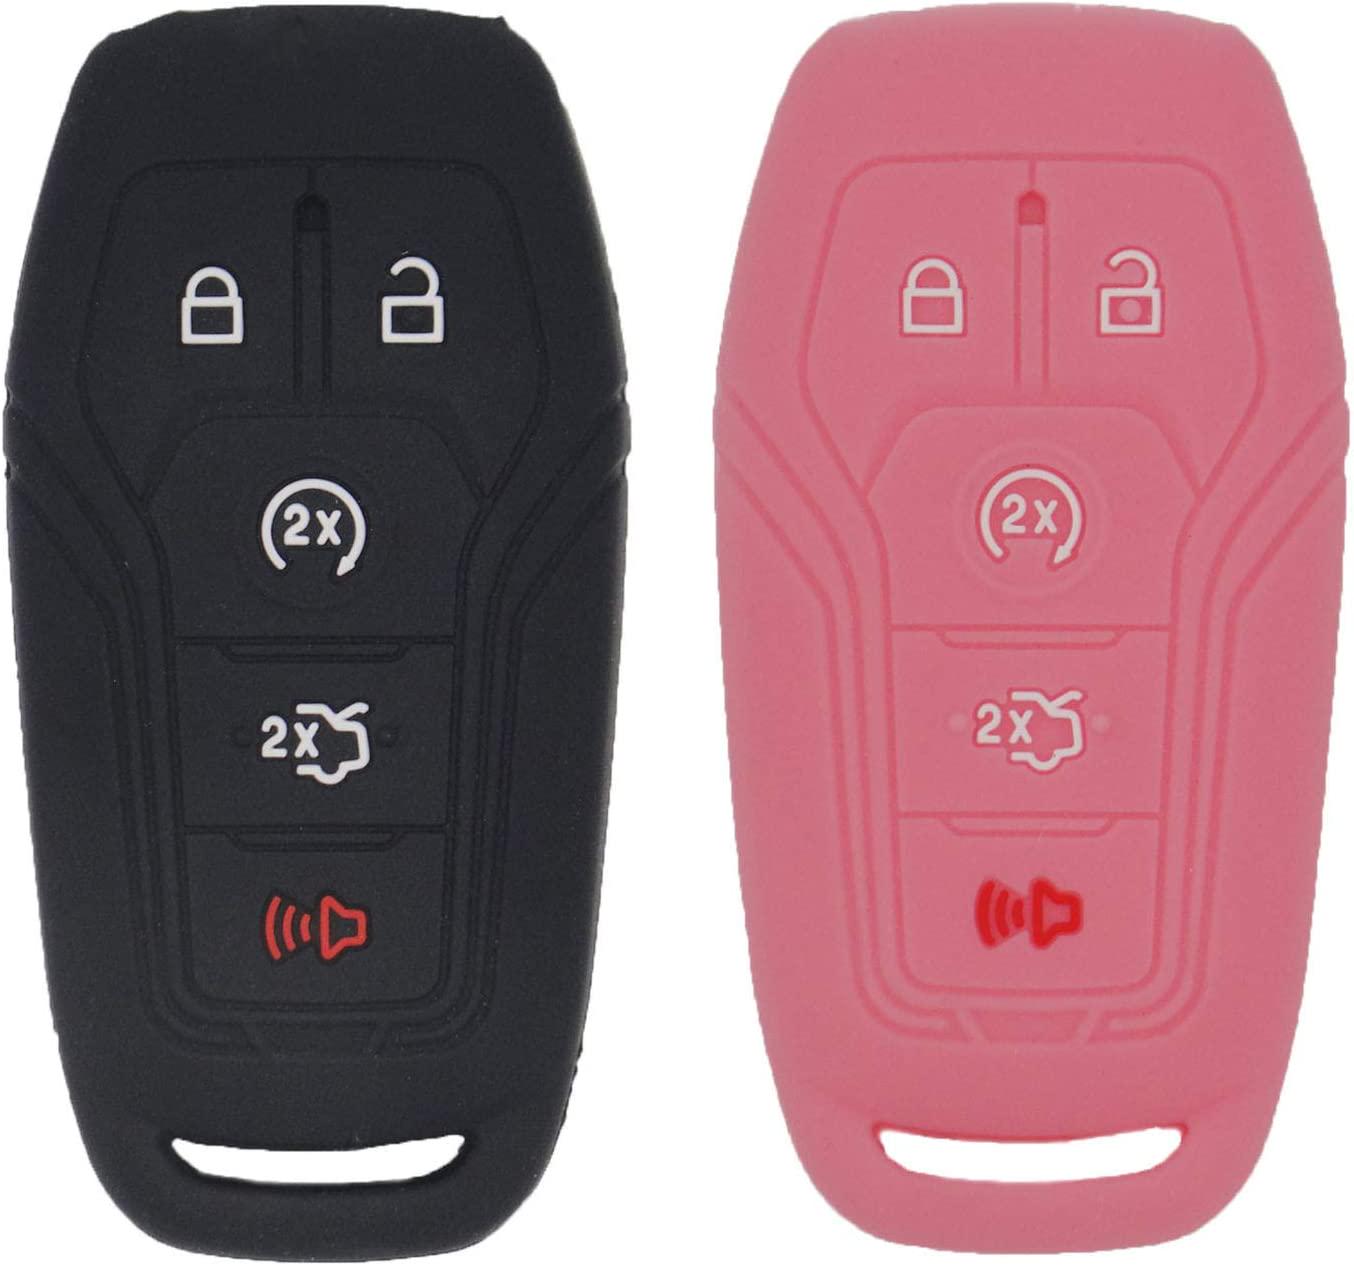 LemSa, LemSa 2Pcs Keyless Entry Remote Car Smart Key Fob Outer Shell Cover Soft Rubber Protective Case for Ford F-150 F-450 Fusion Explorer Lincoln Fusion MKZ Mustang MKC Black/Pink